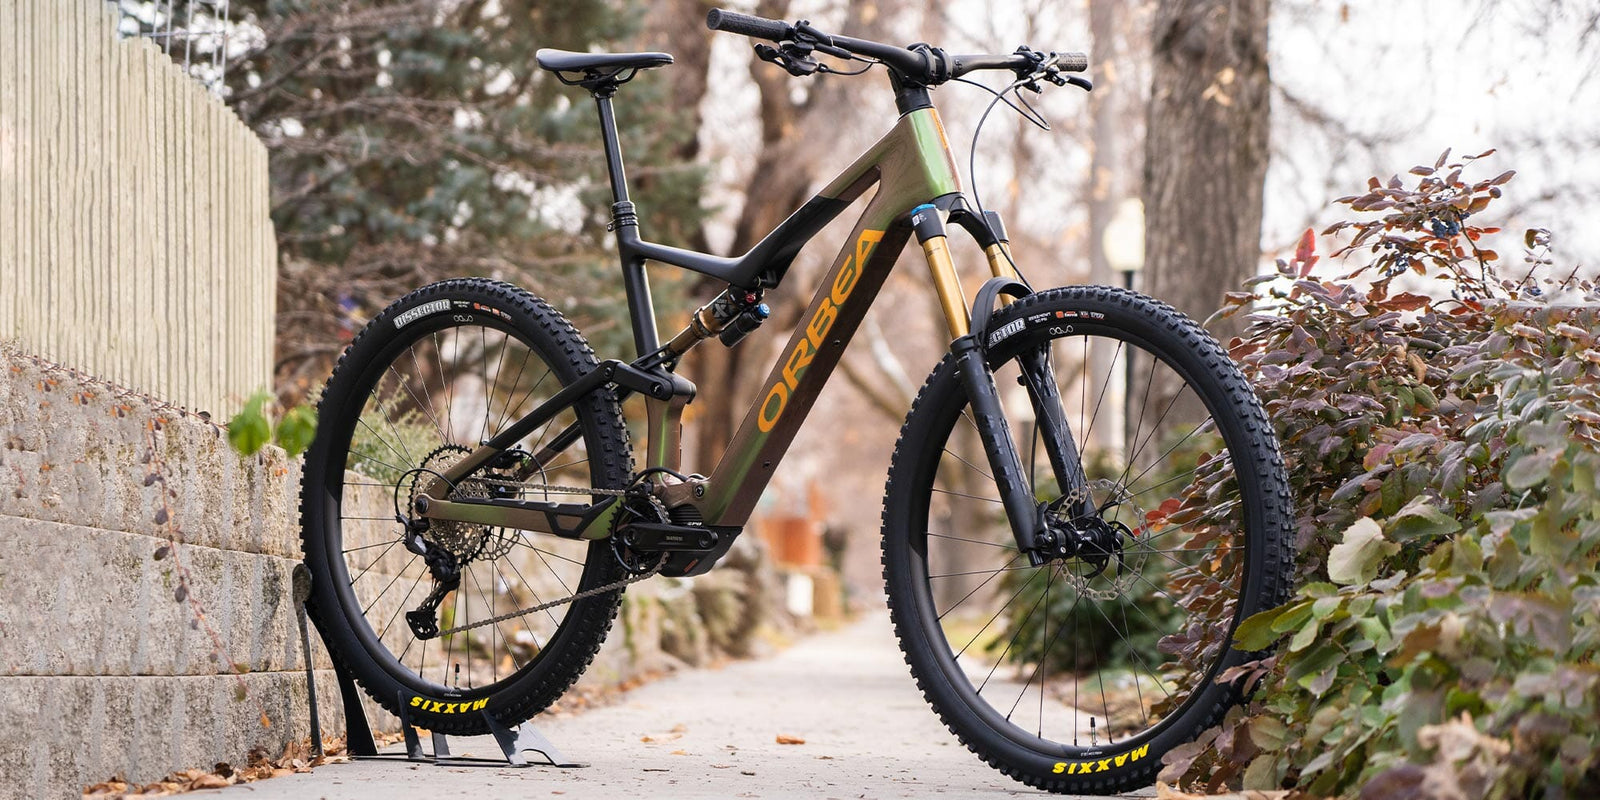 Video Review - Orbea Rise e-MTB First Look